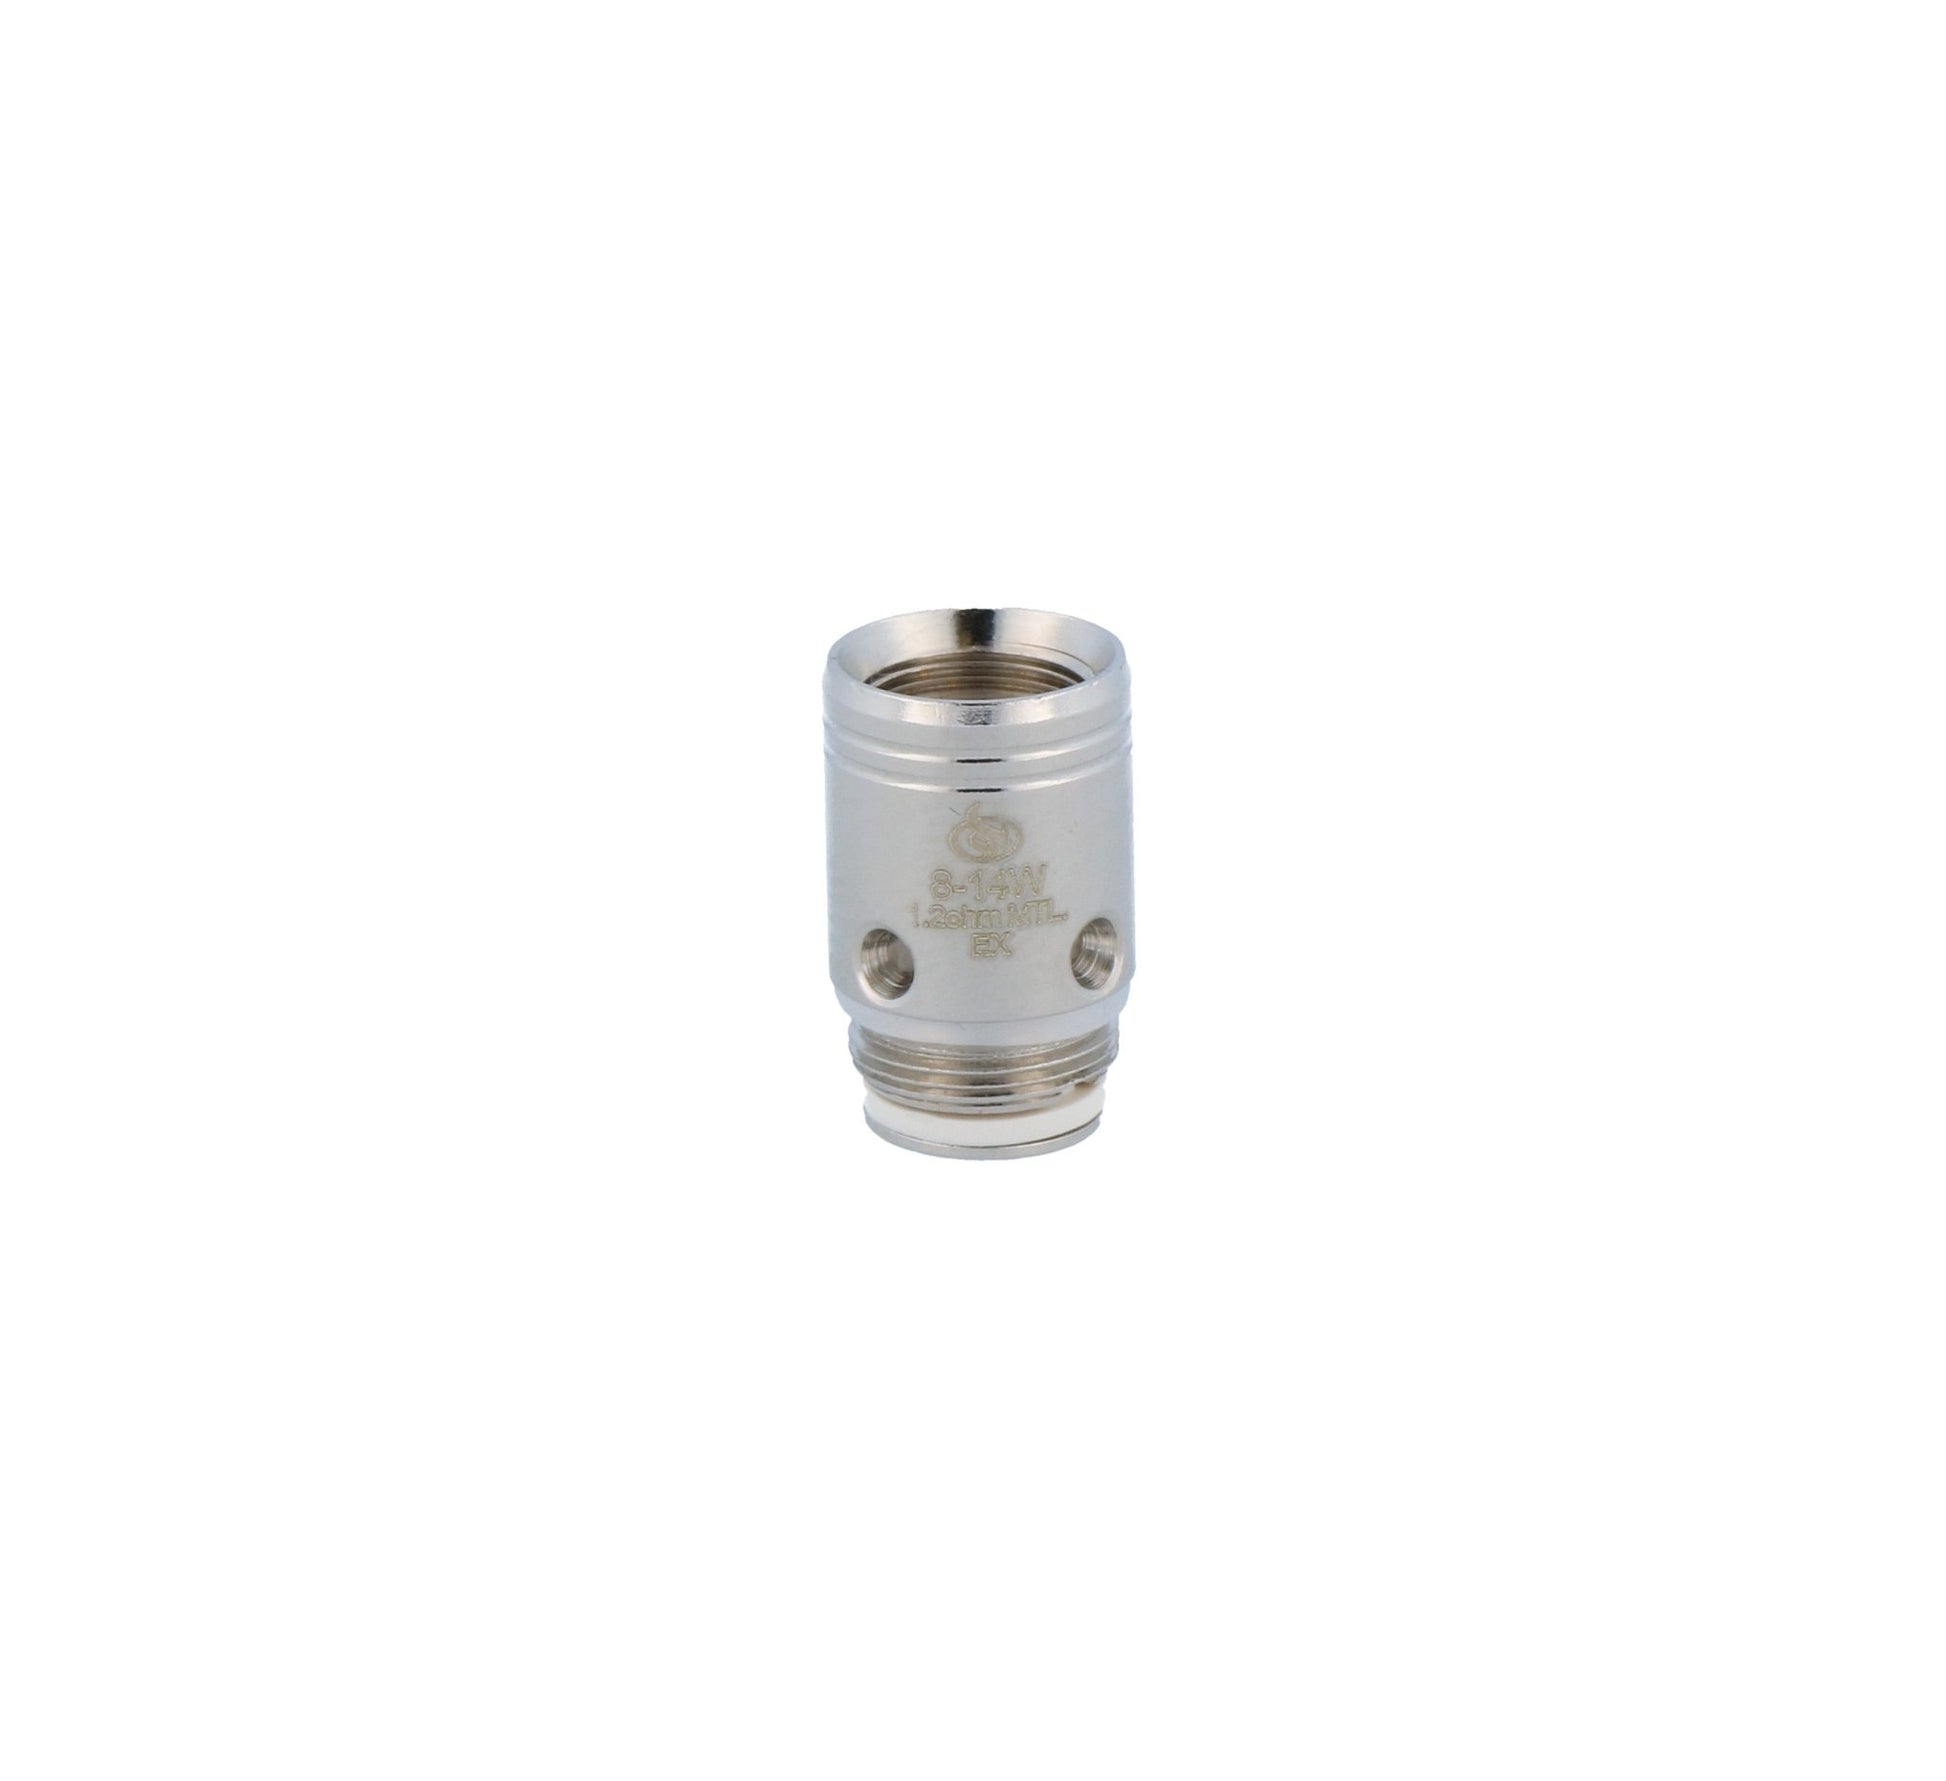 InnoCigs - EX - Heads 1,2 Ohm / 0,5 Ohm (5 Stück pro Packung) - 1er Packung 0,5 Ohm - Vapes4you